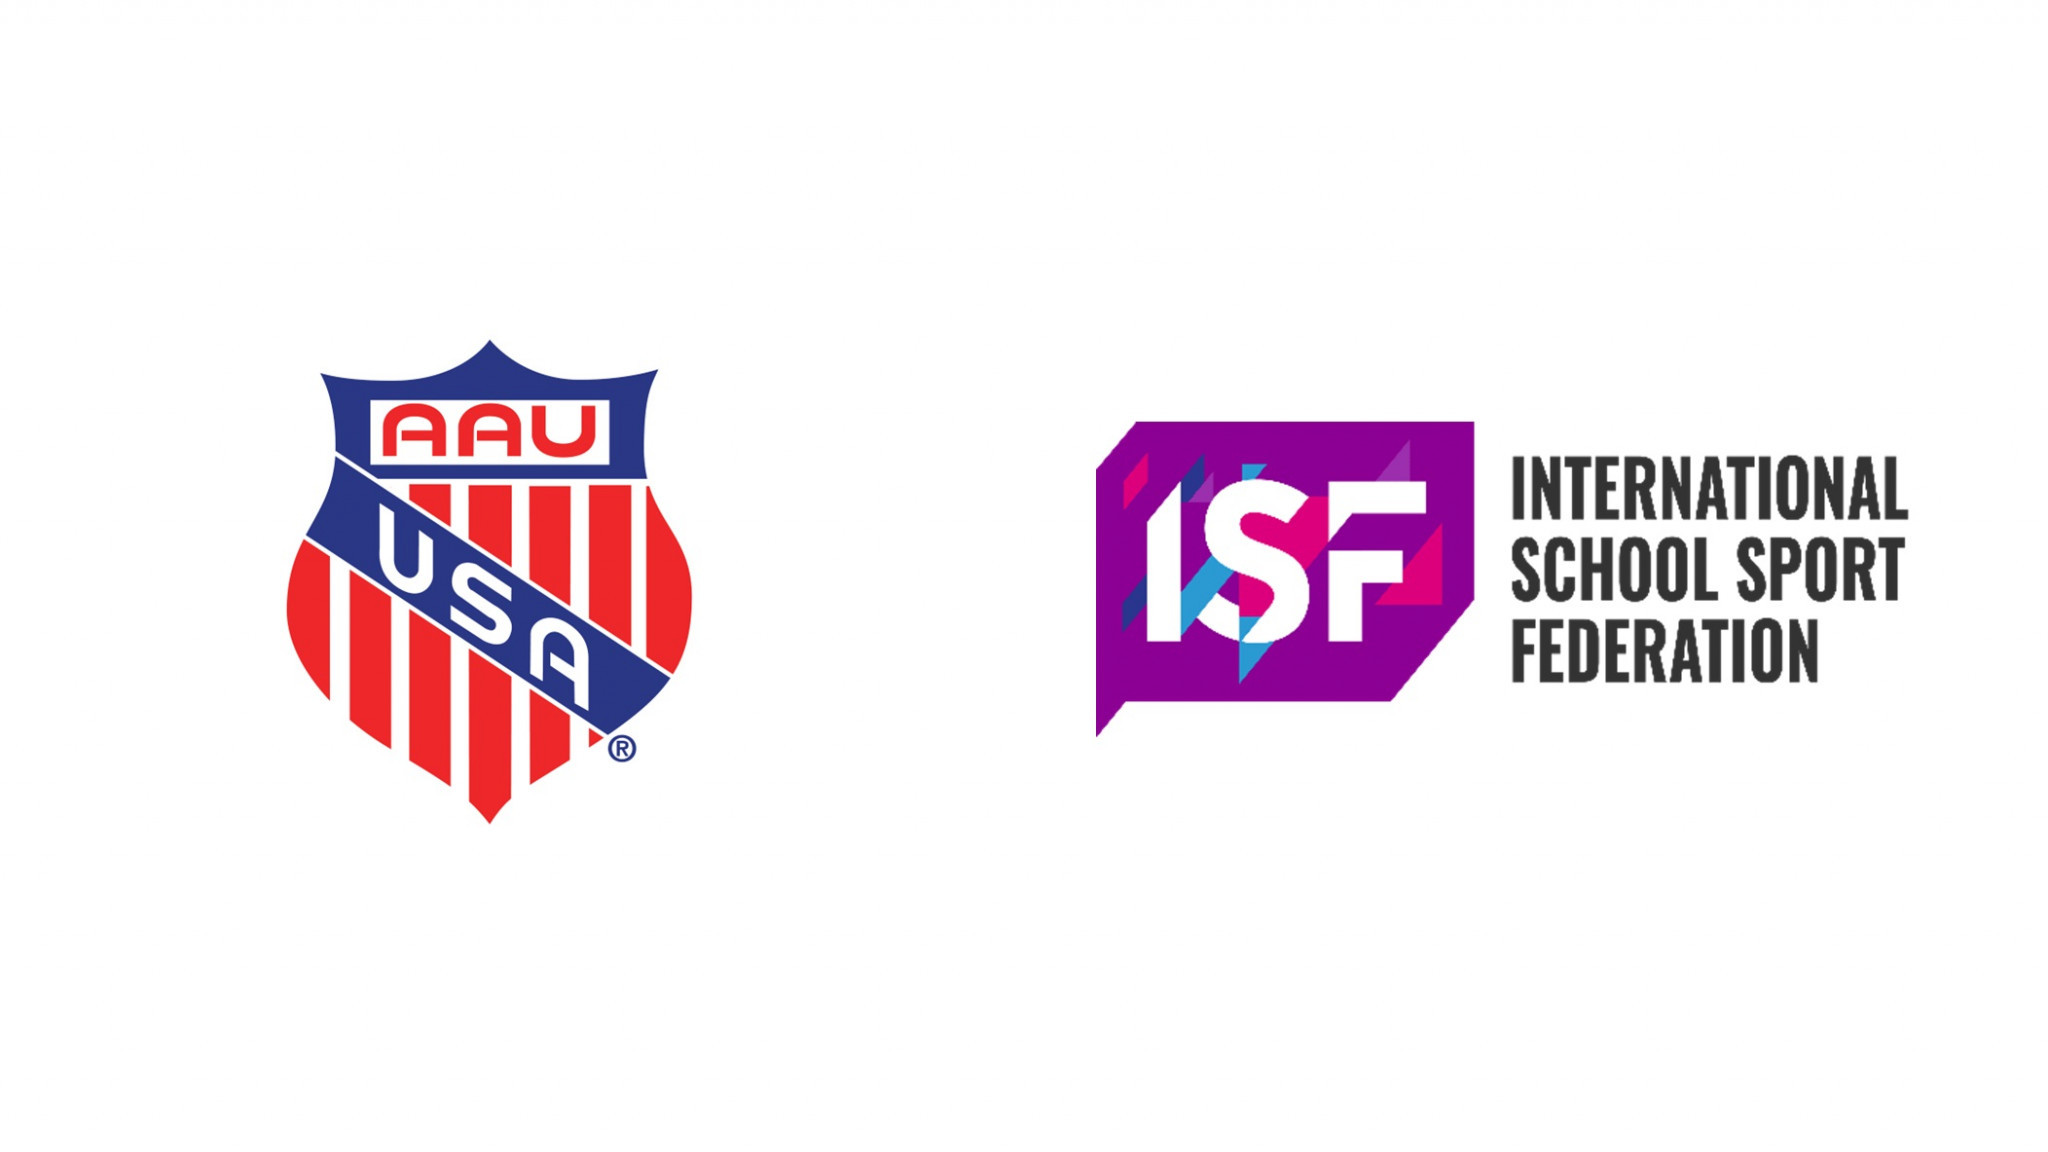 The International School Sport Federation has secured an agreement with the Amateur Athletic Union ©ISF